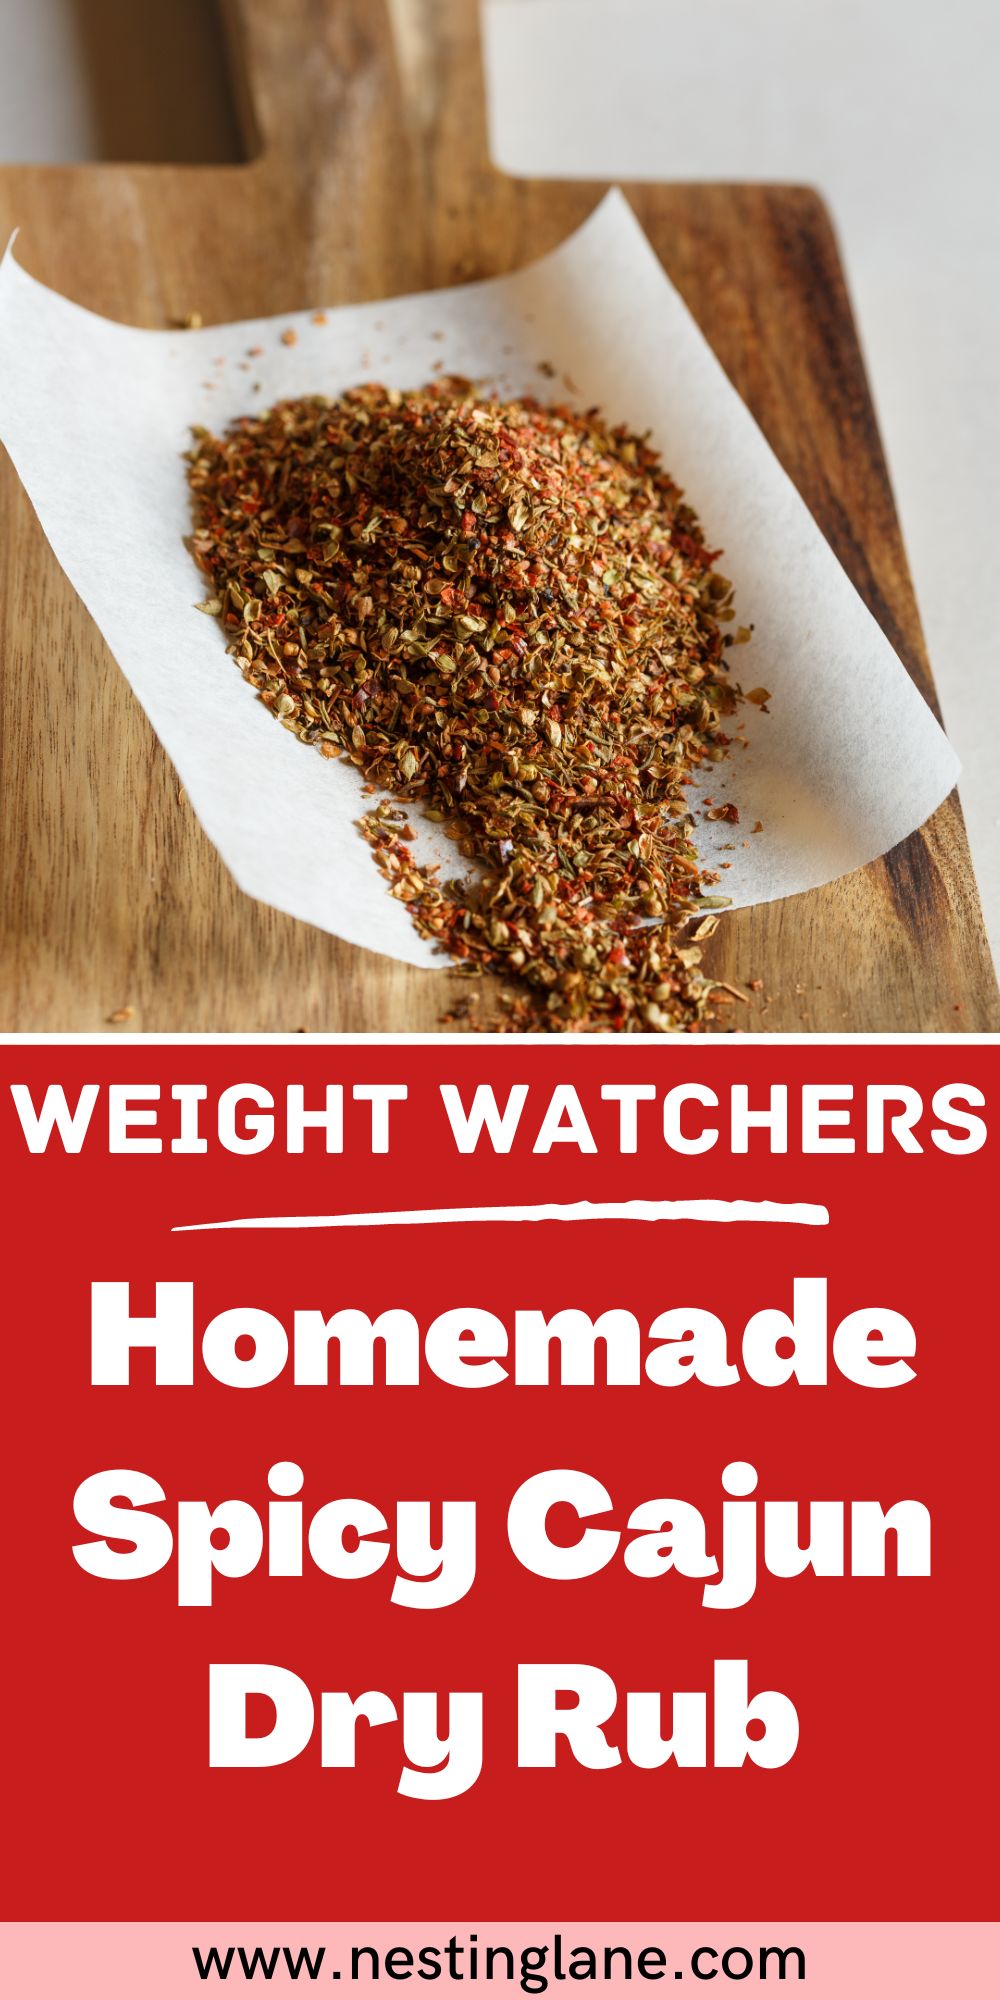 Graphic for Pinterest of Homemade Spicy Cajun Dry Rub (Weight Watchers) Recipe.